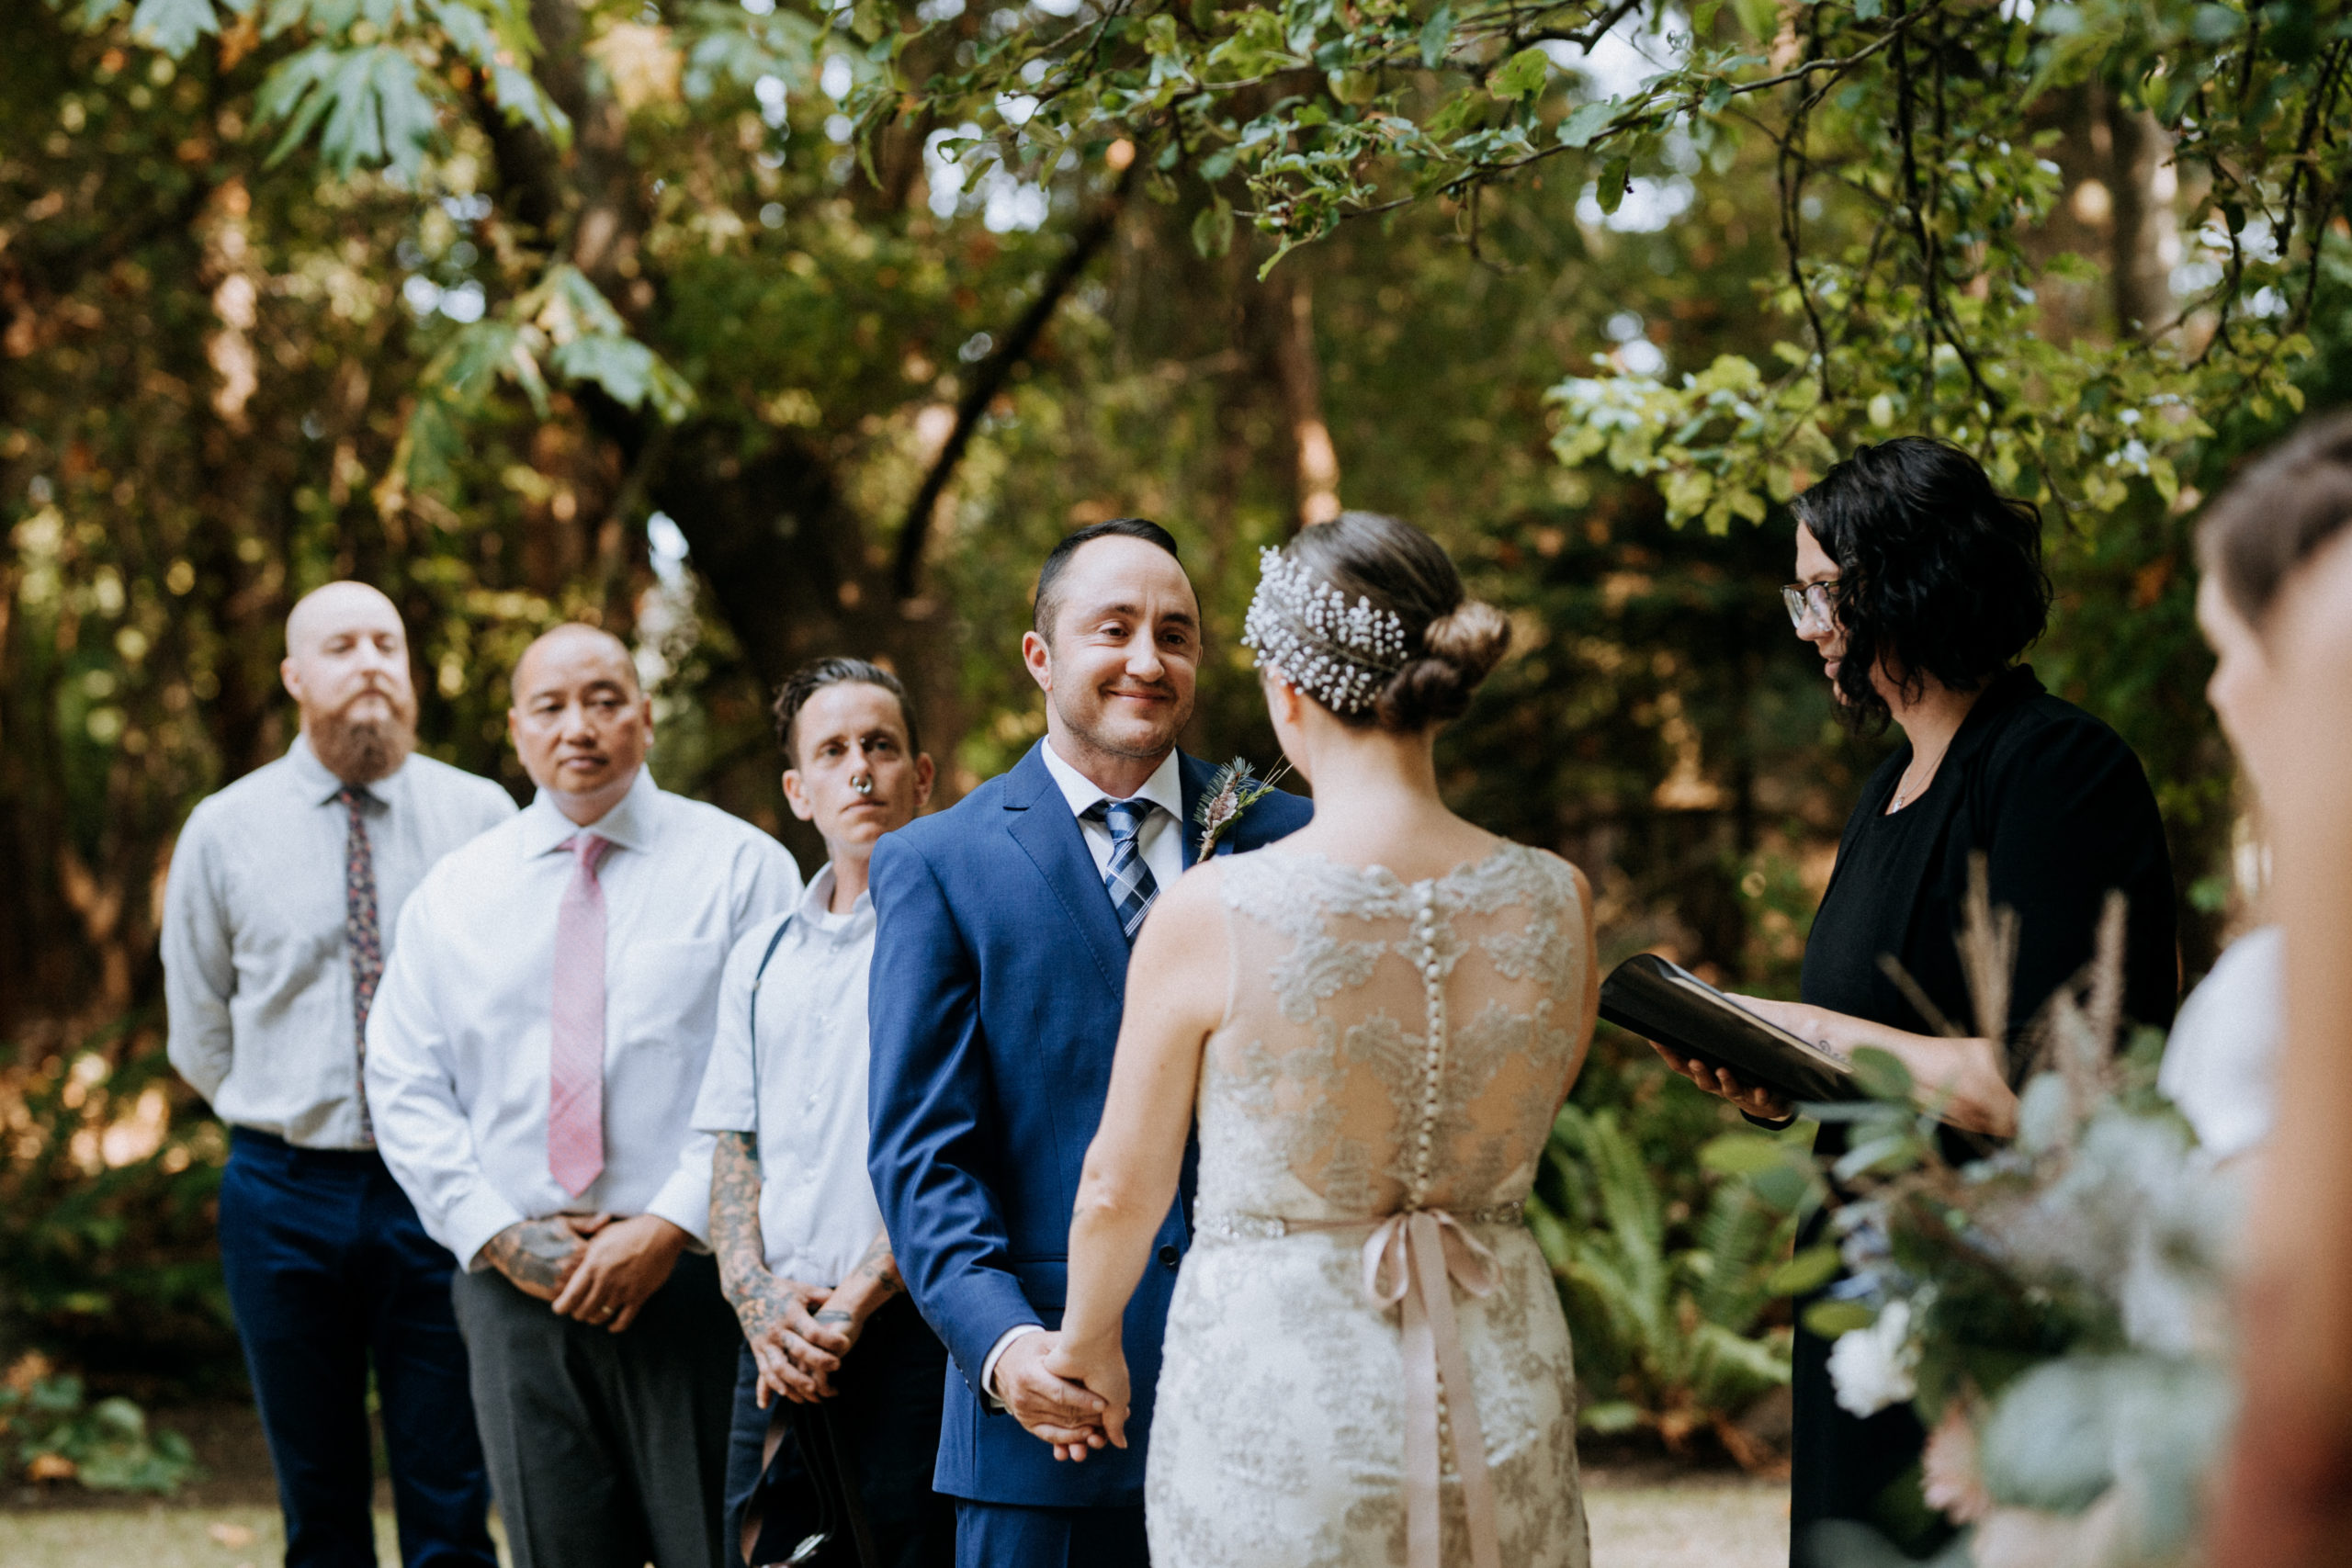 Vancouver Island wedding with Officiant Chris-Ann